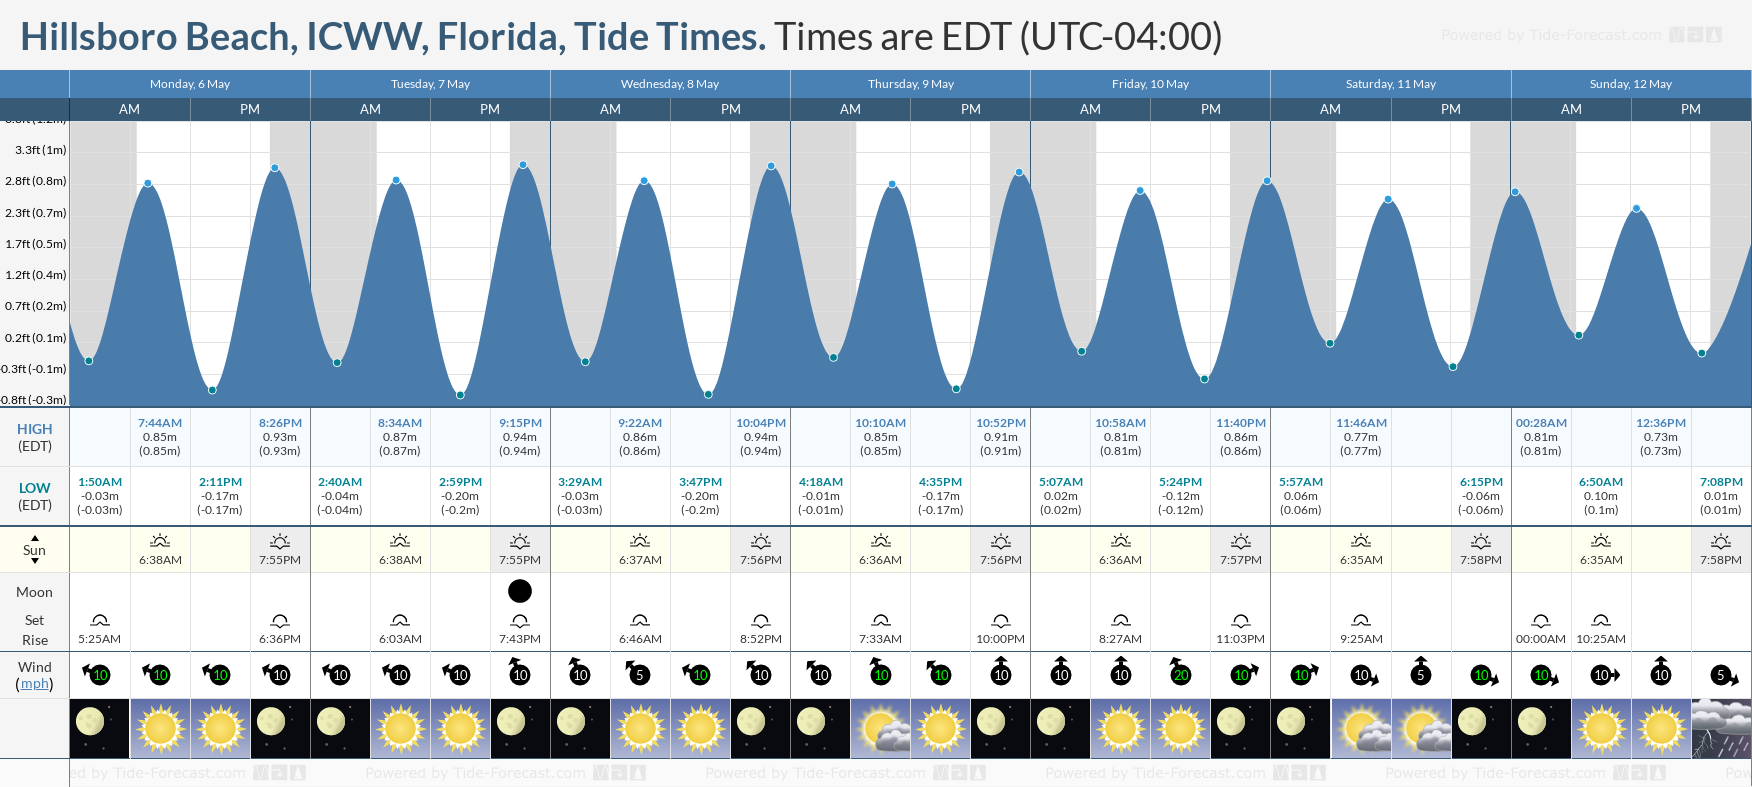 Hillsboro Beach, ICWW, Florida Tide Chart including high and low tide times for the next 7 days